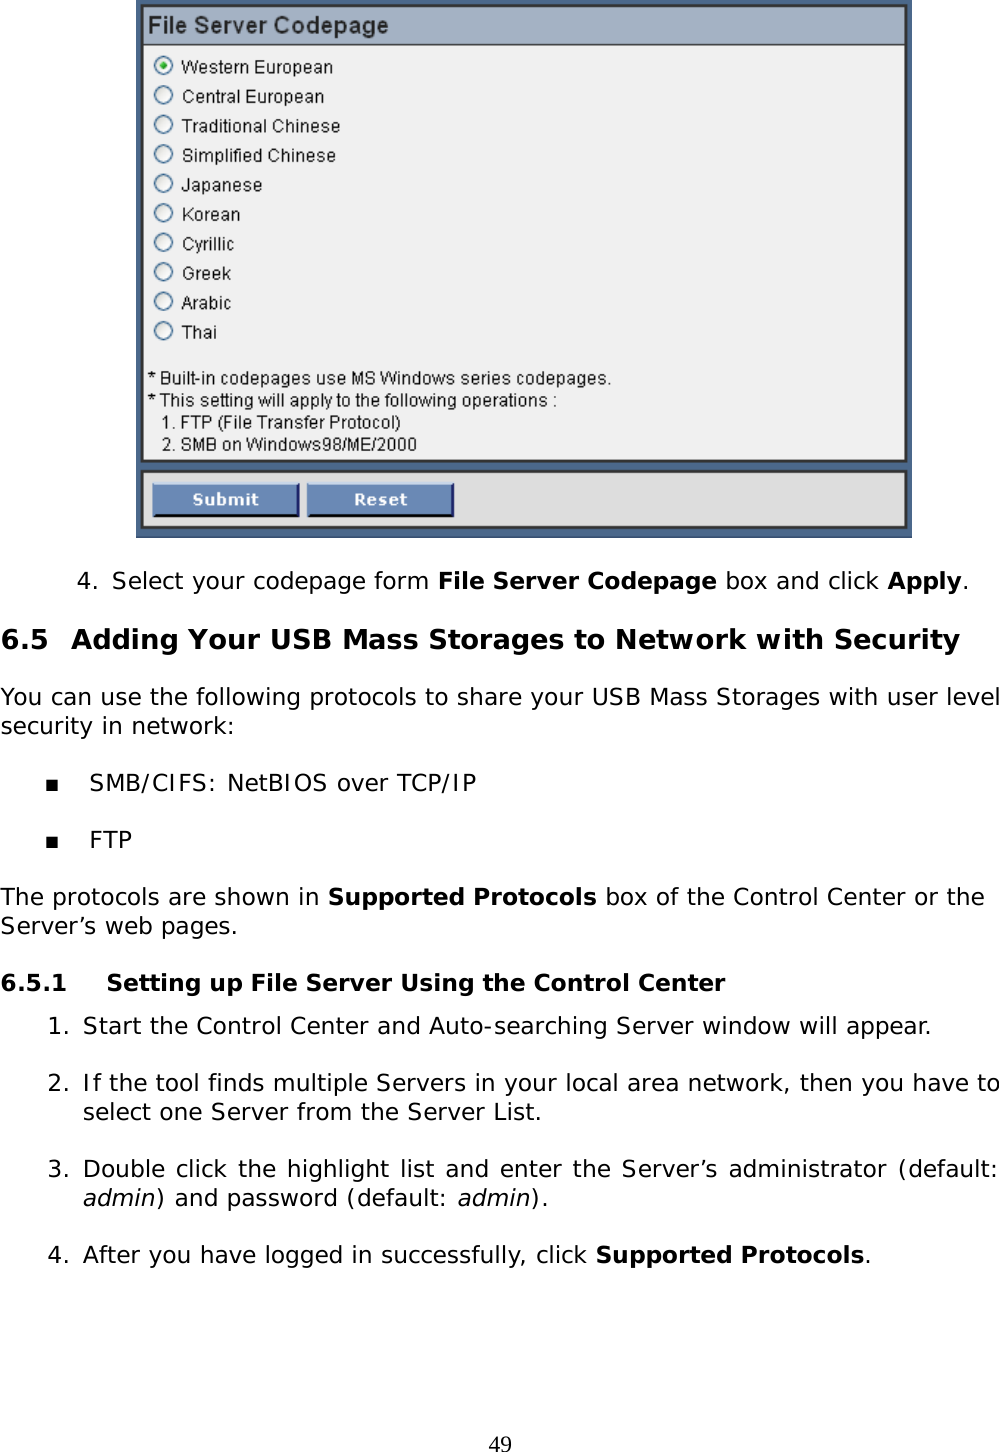     49  4. Select your codepage form File Server Codepage box and click Apply.  6.5 Adding Your USB Mass Storages to Network with Security  You can use the following protocols to share your USB Mass Storages with user level security in network:    SMB/CIFS: NetBIOS over TCP/IP   FTP  The protocols are shown in Supported Protocols box of the Control Center or the Server’s web pages.  6.5.1 Setting up File Server Using the Control Center 1. Start the Control Center and Auto-searching Server window will appear.  2. If the tool finds multiple Servers in your local area network, then you have to select one Server from the Server List.   3. Double click the highlight list and enter the Server’s administrator (default: admin) and password (default: admin).  4. After you have logged in successfully, click Supported Protocols.  